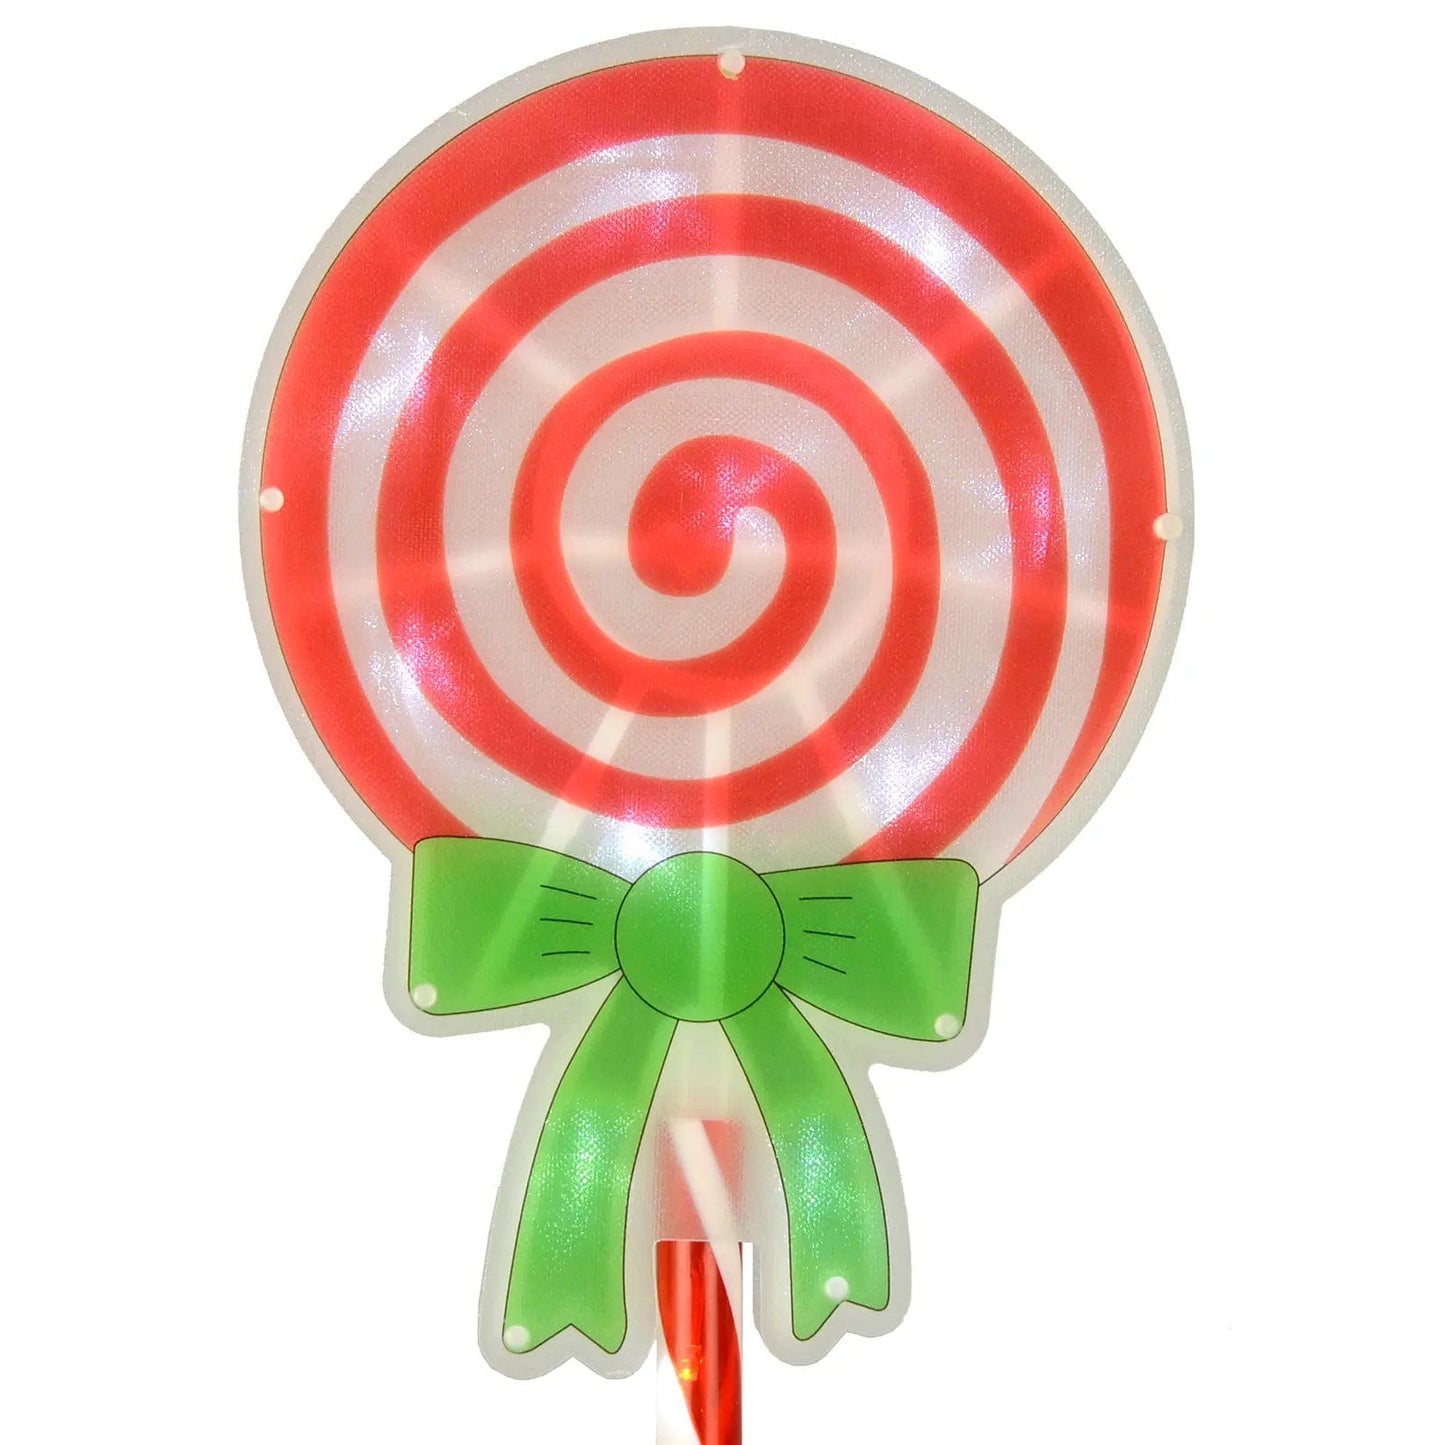 detail shot of red and white swirl design on lollipop pathway light